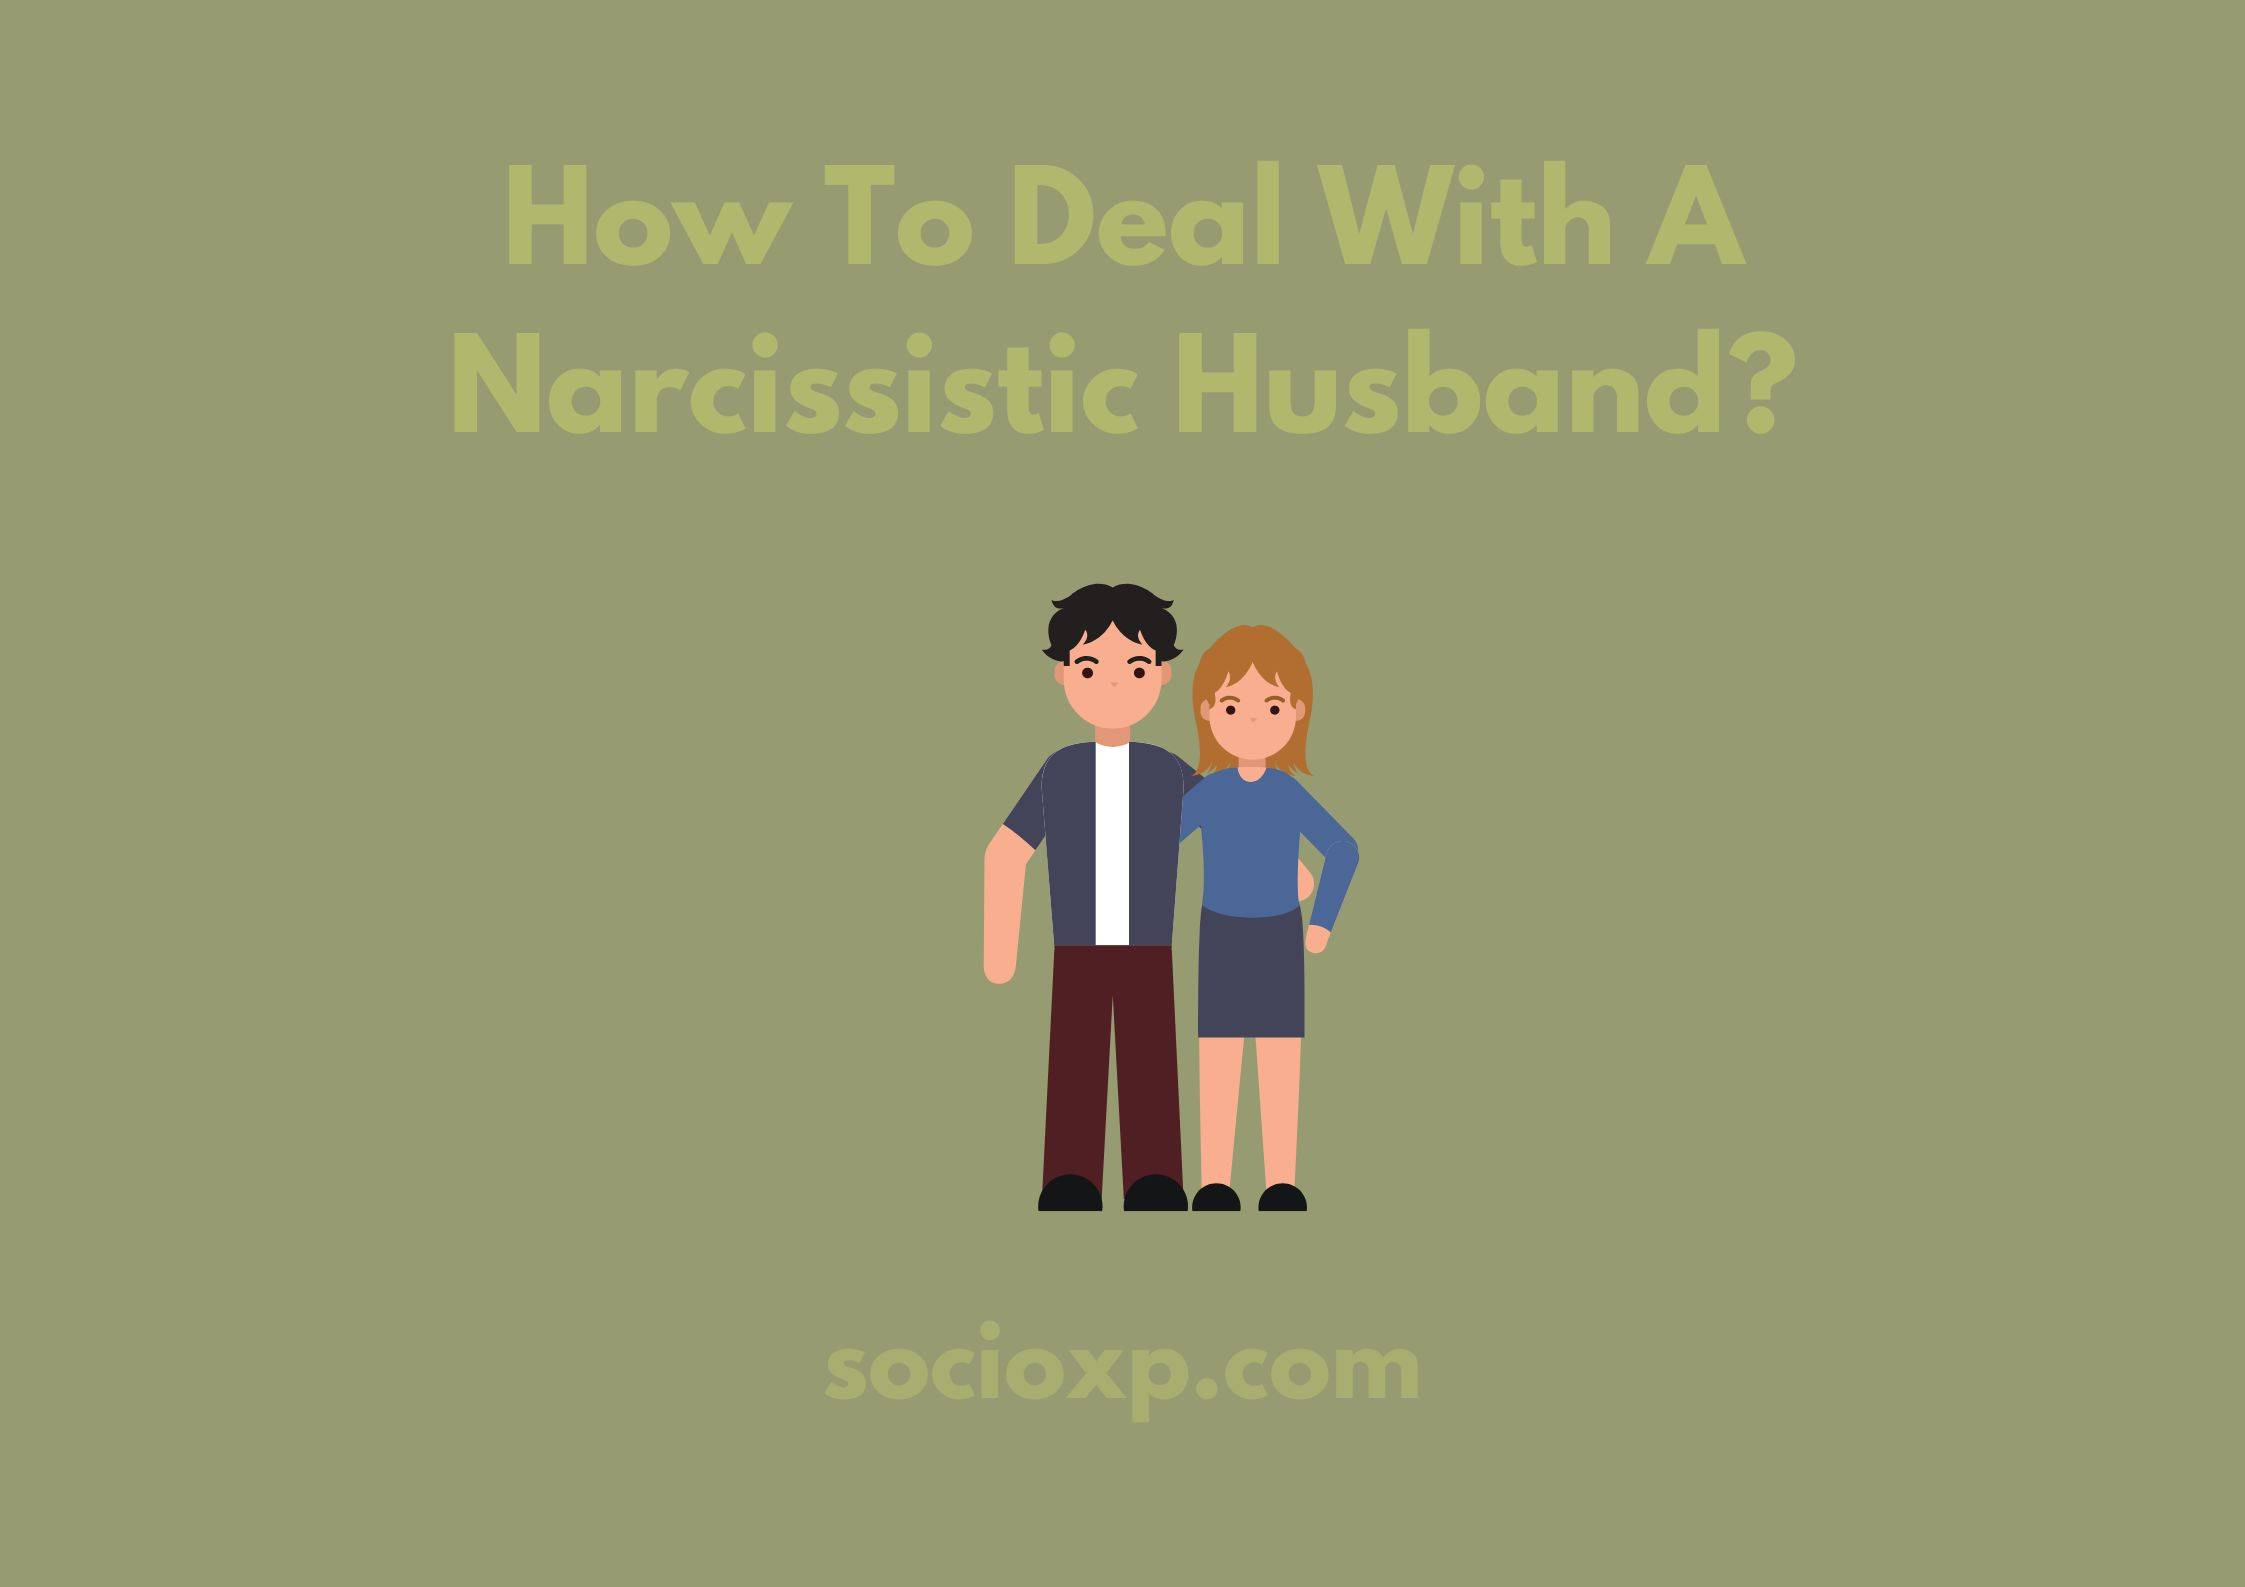 How To Deal With A Narcissistic Husband?